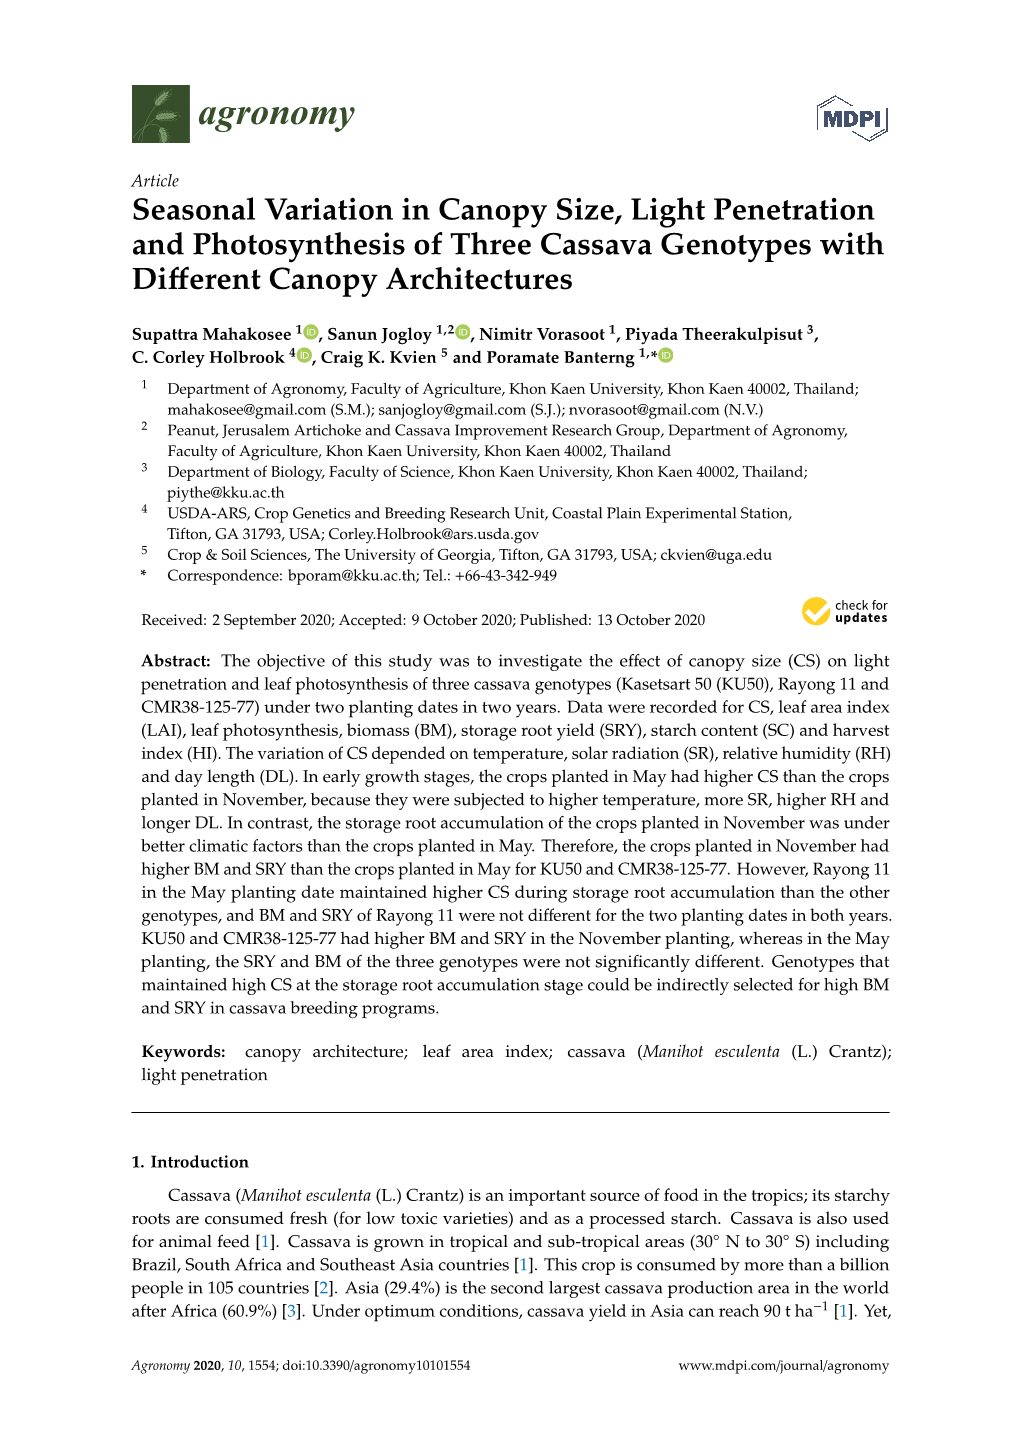 Seasonal Variation in Canopy Size, Light Penetration and Photosynthesis of Three Cassava Genotypes with Diﬀerent Canopy Architectures